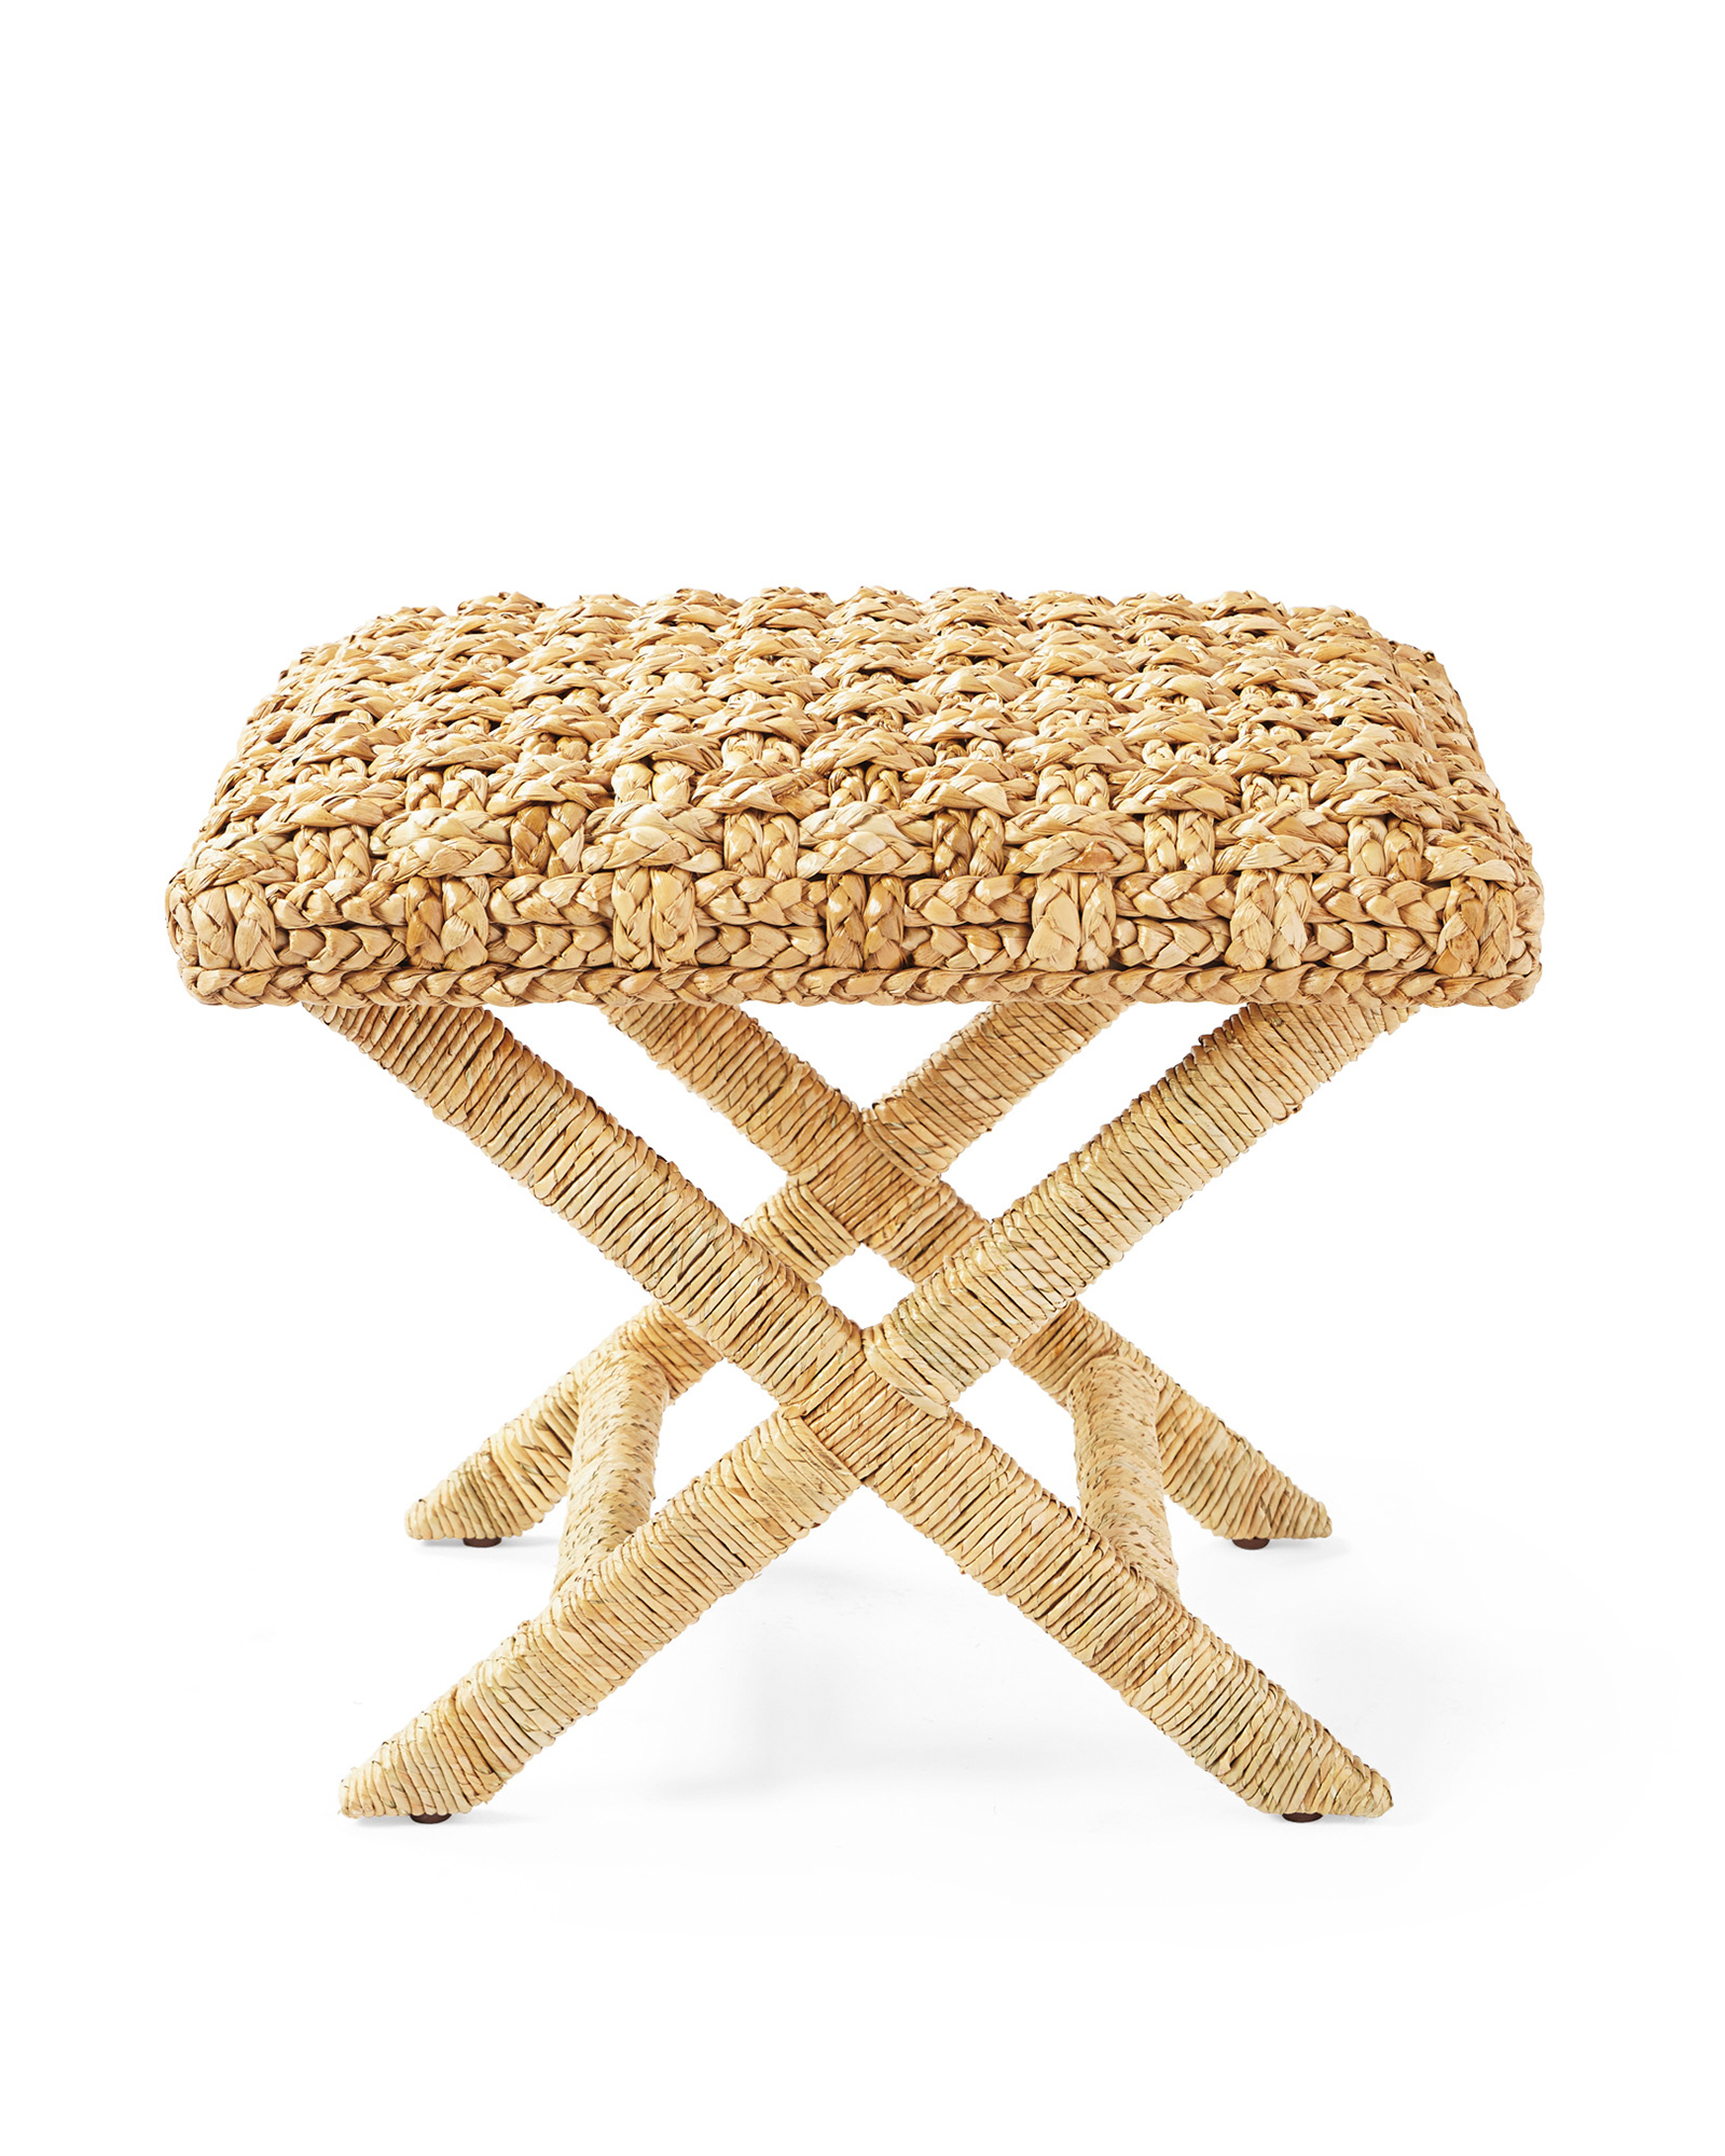 Costa X-Base Stool - Serena and Lily